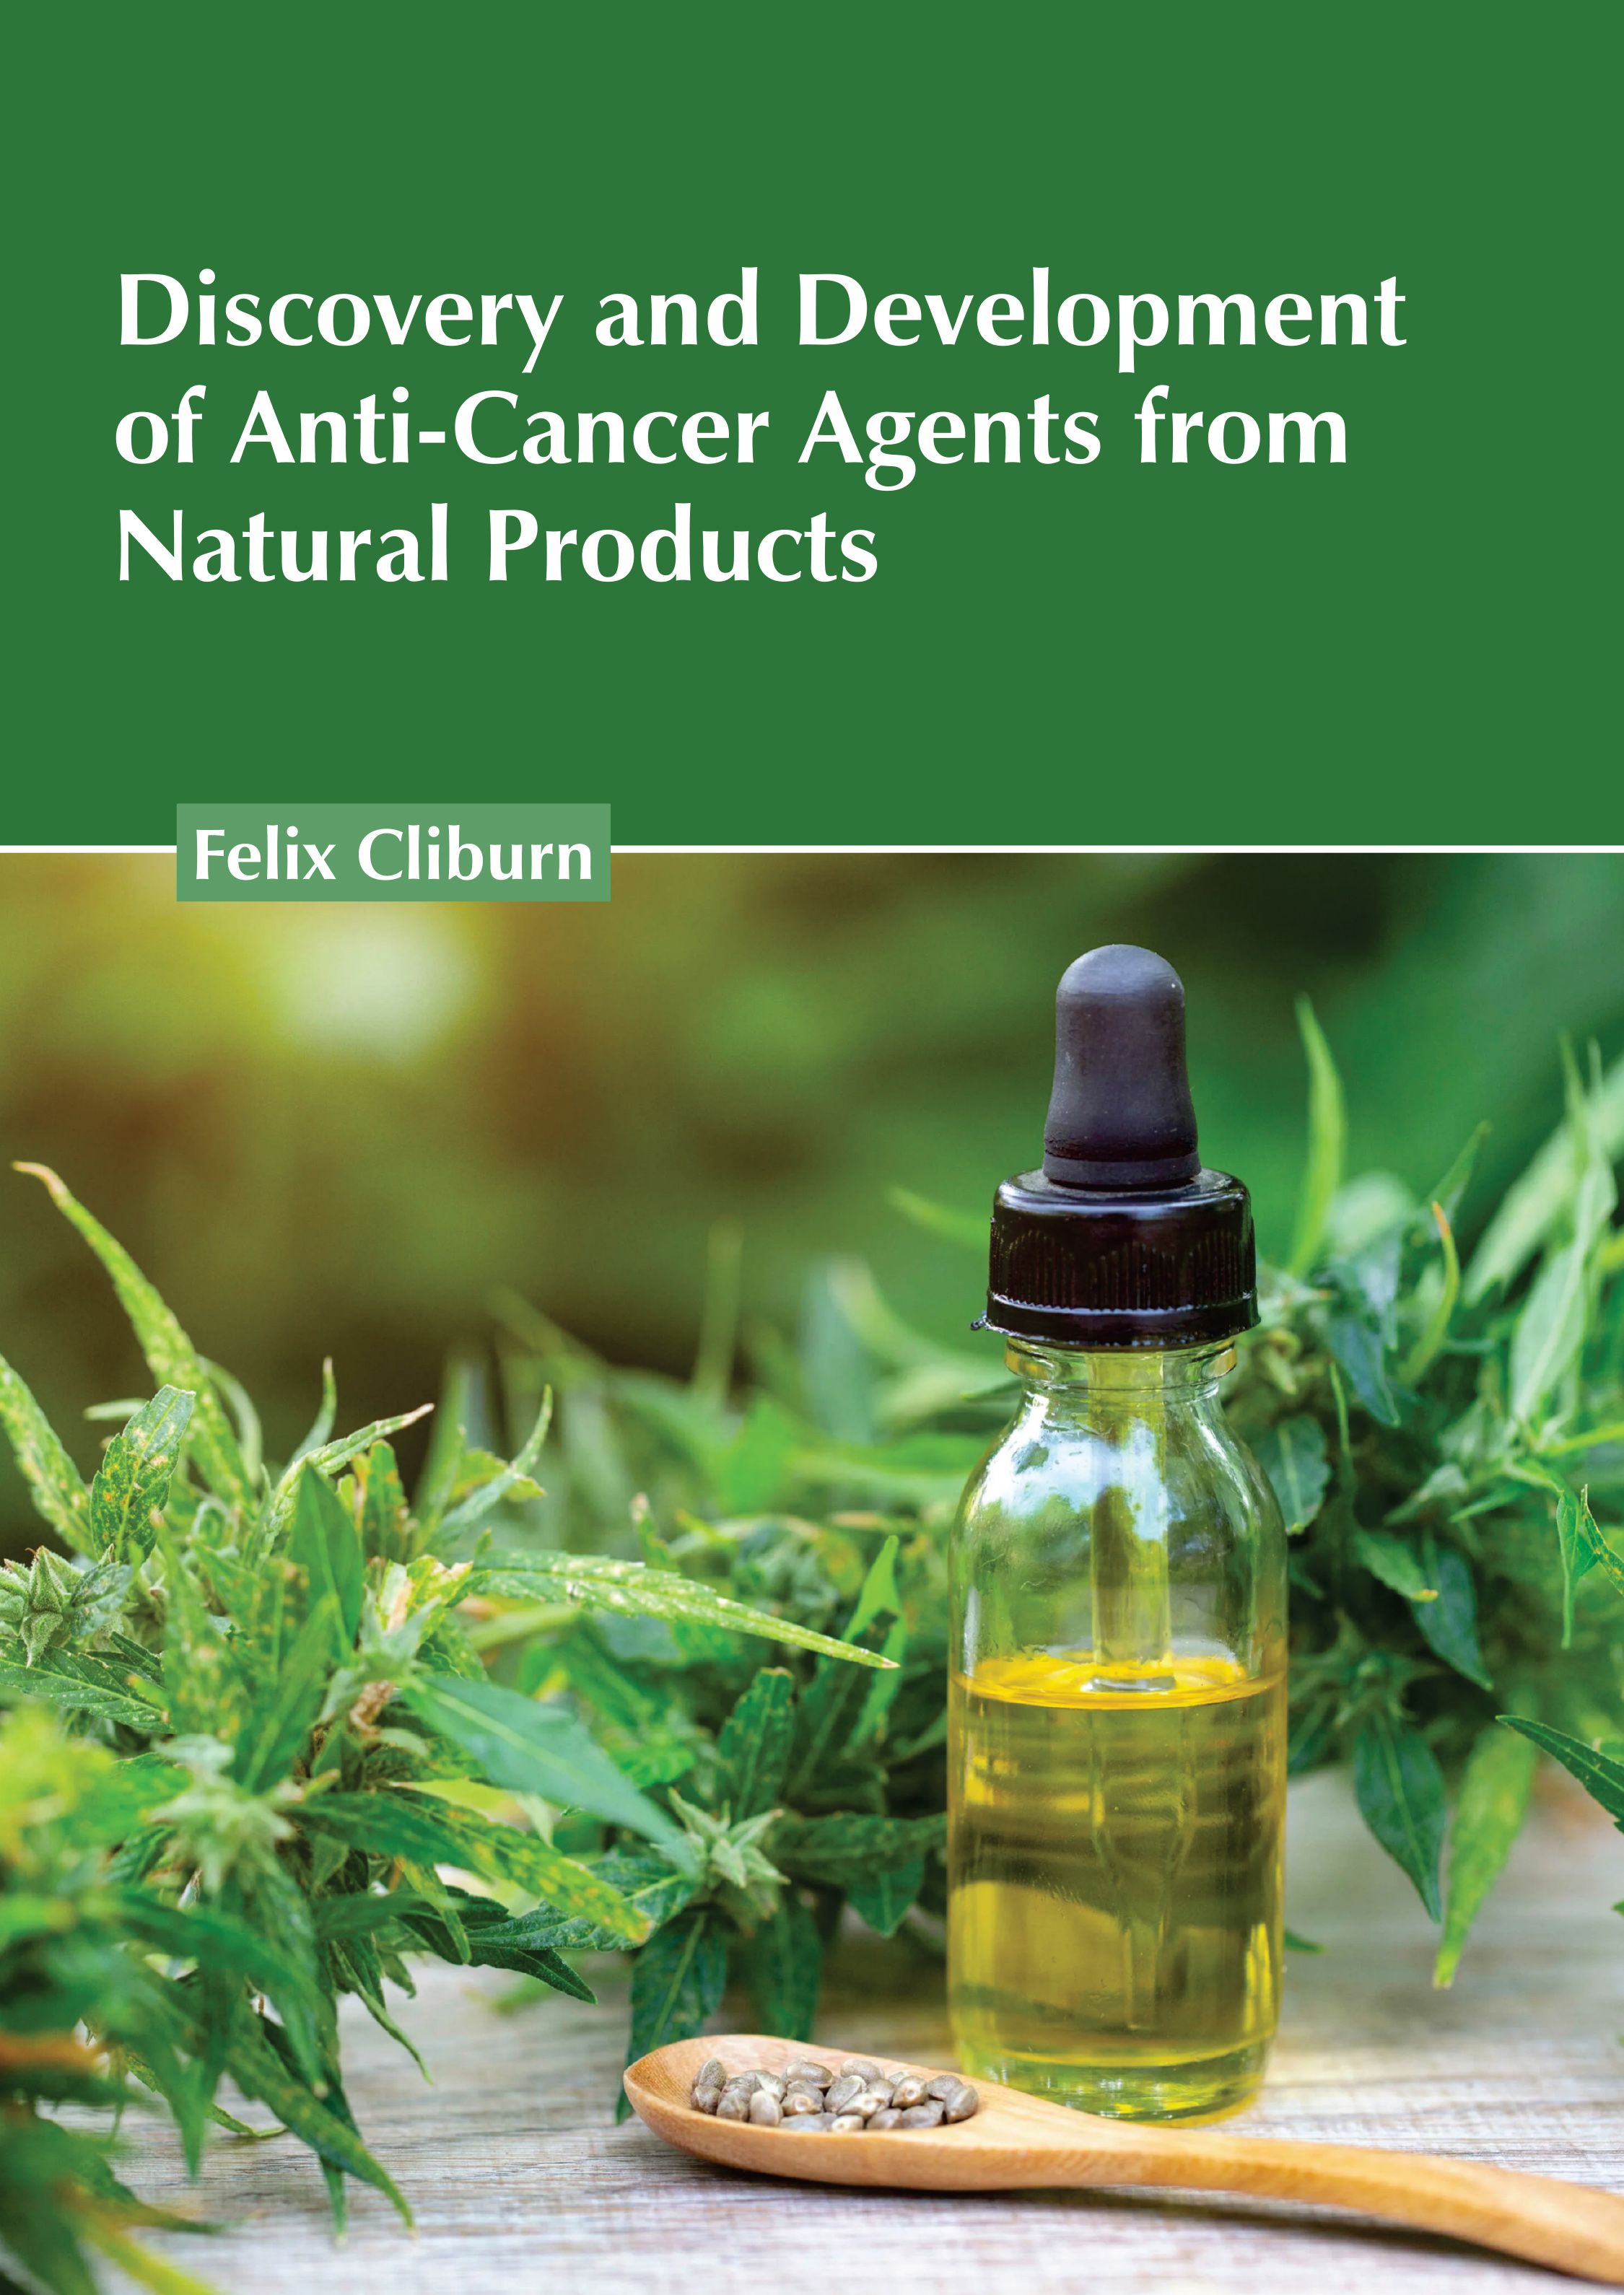 DISCOVERY AND DEVELOPMENT OF ANTI-CANCER AGENTS FROM NATURAL PRODUCTS